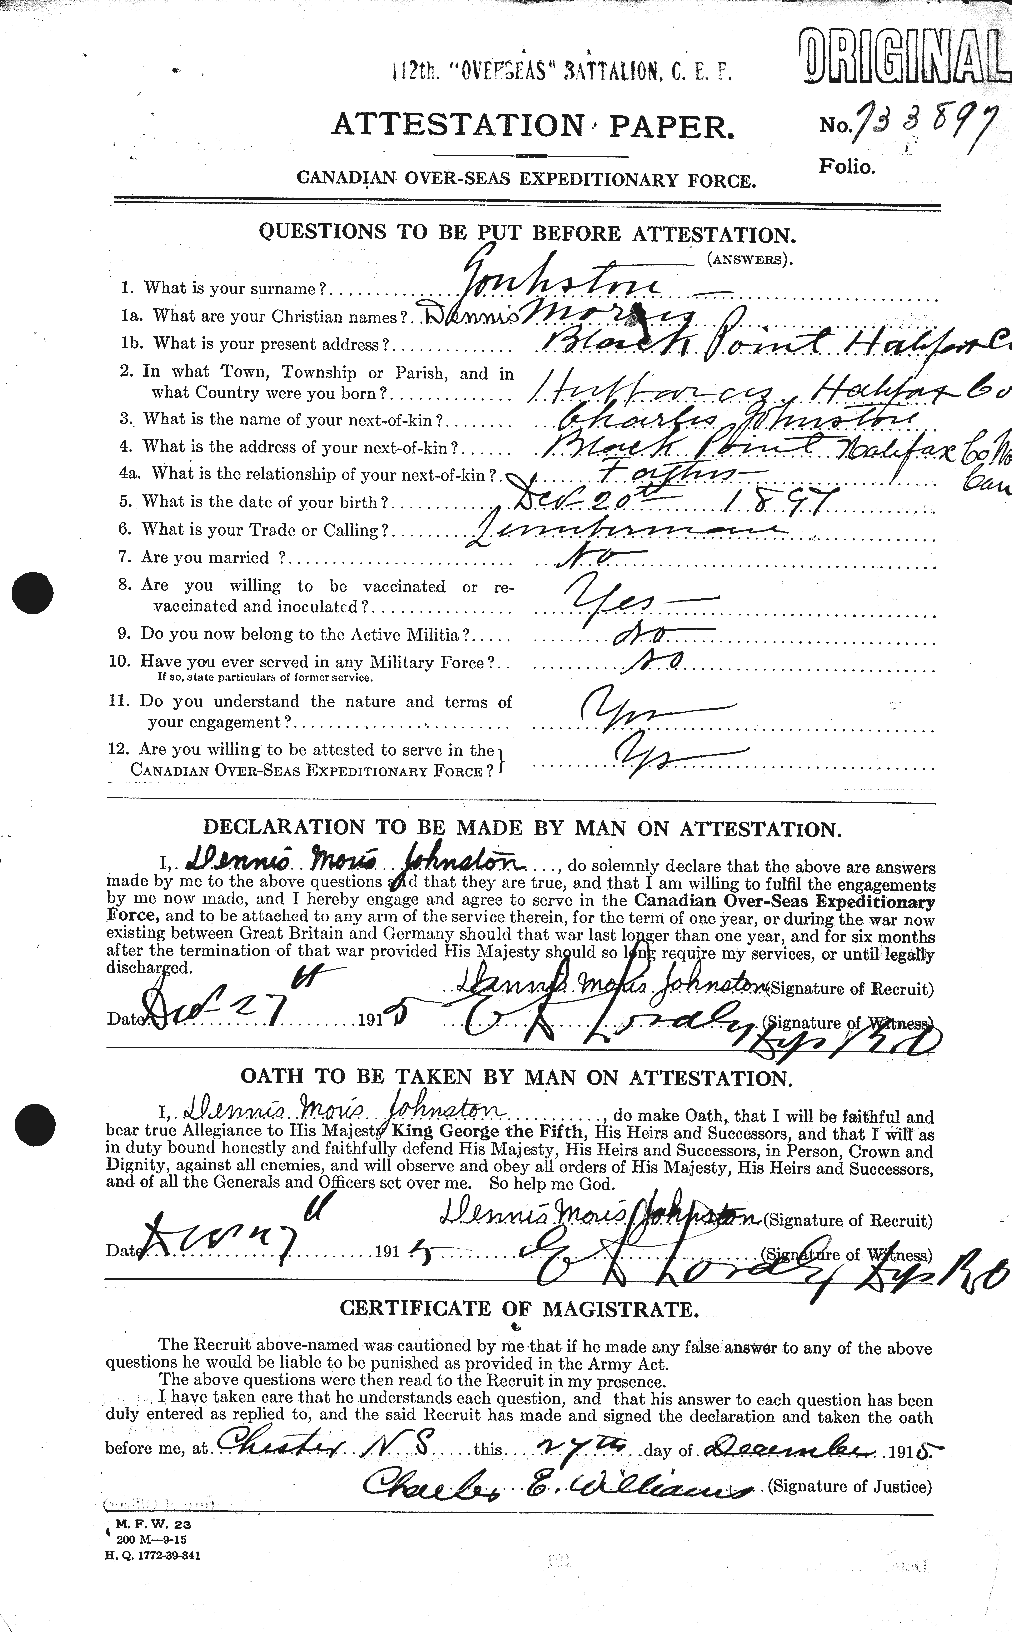 Personnel Records of the First World War - CEF 423179a